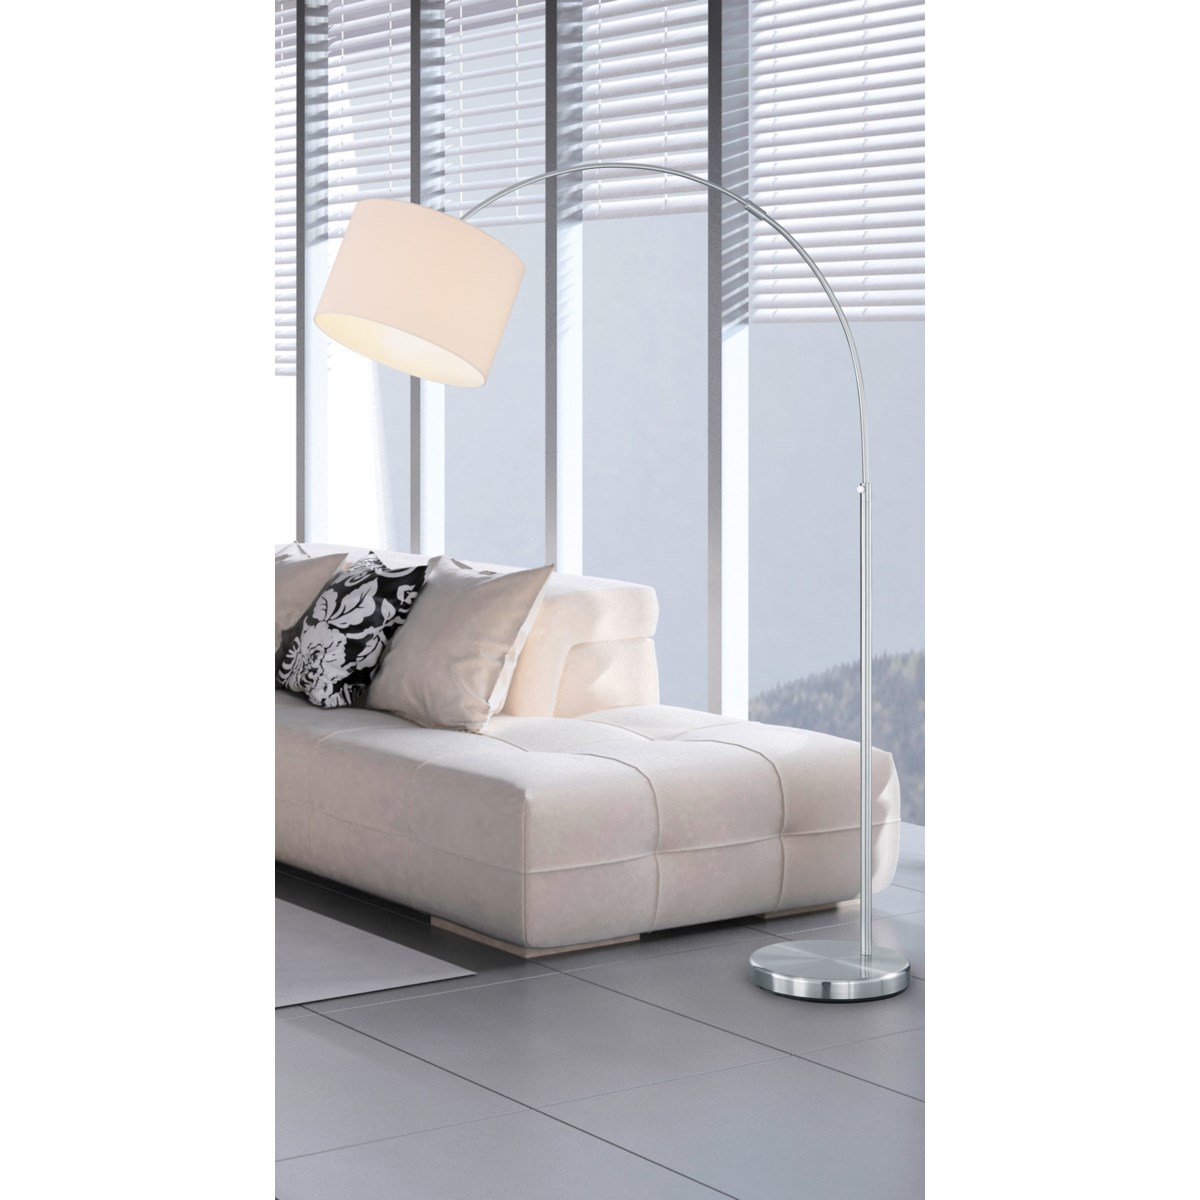 Grannus Arch Floor Lamp in Satin Nickel with White Shade